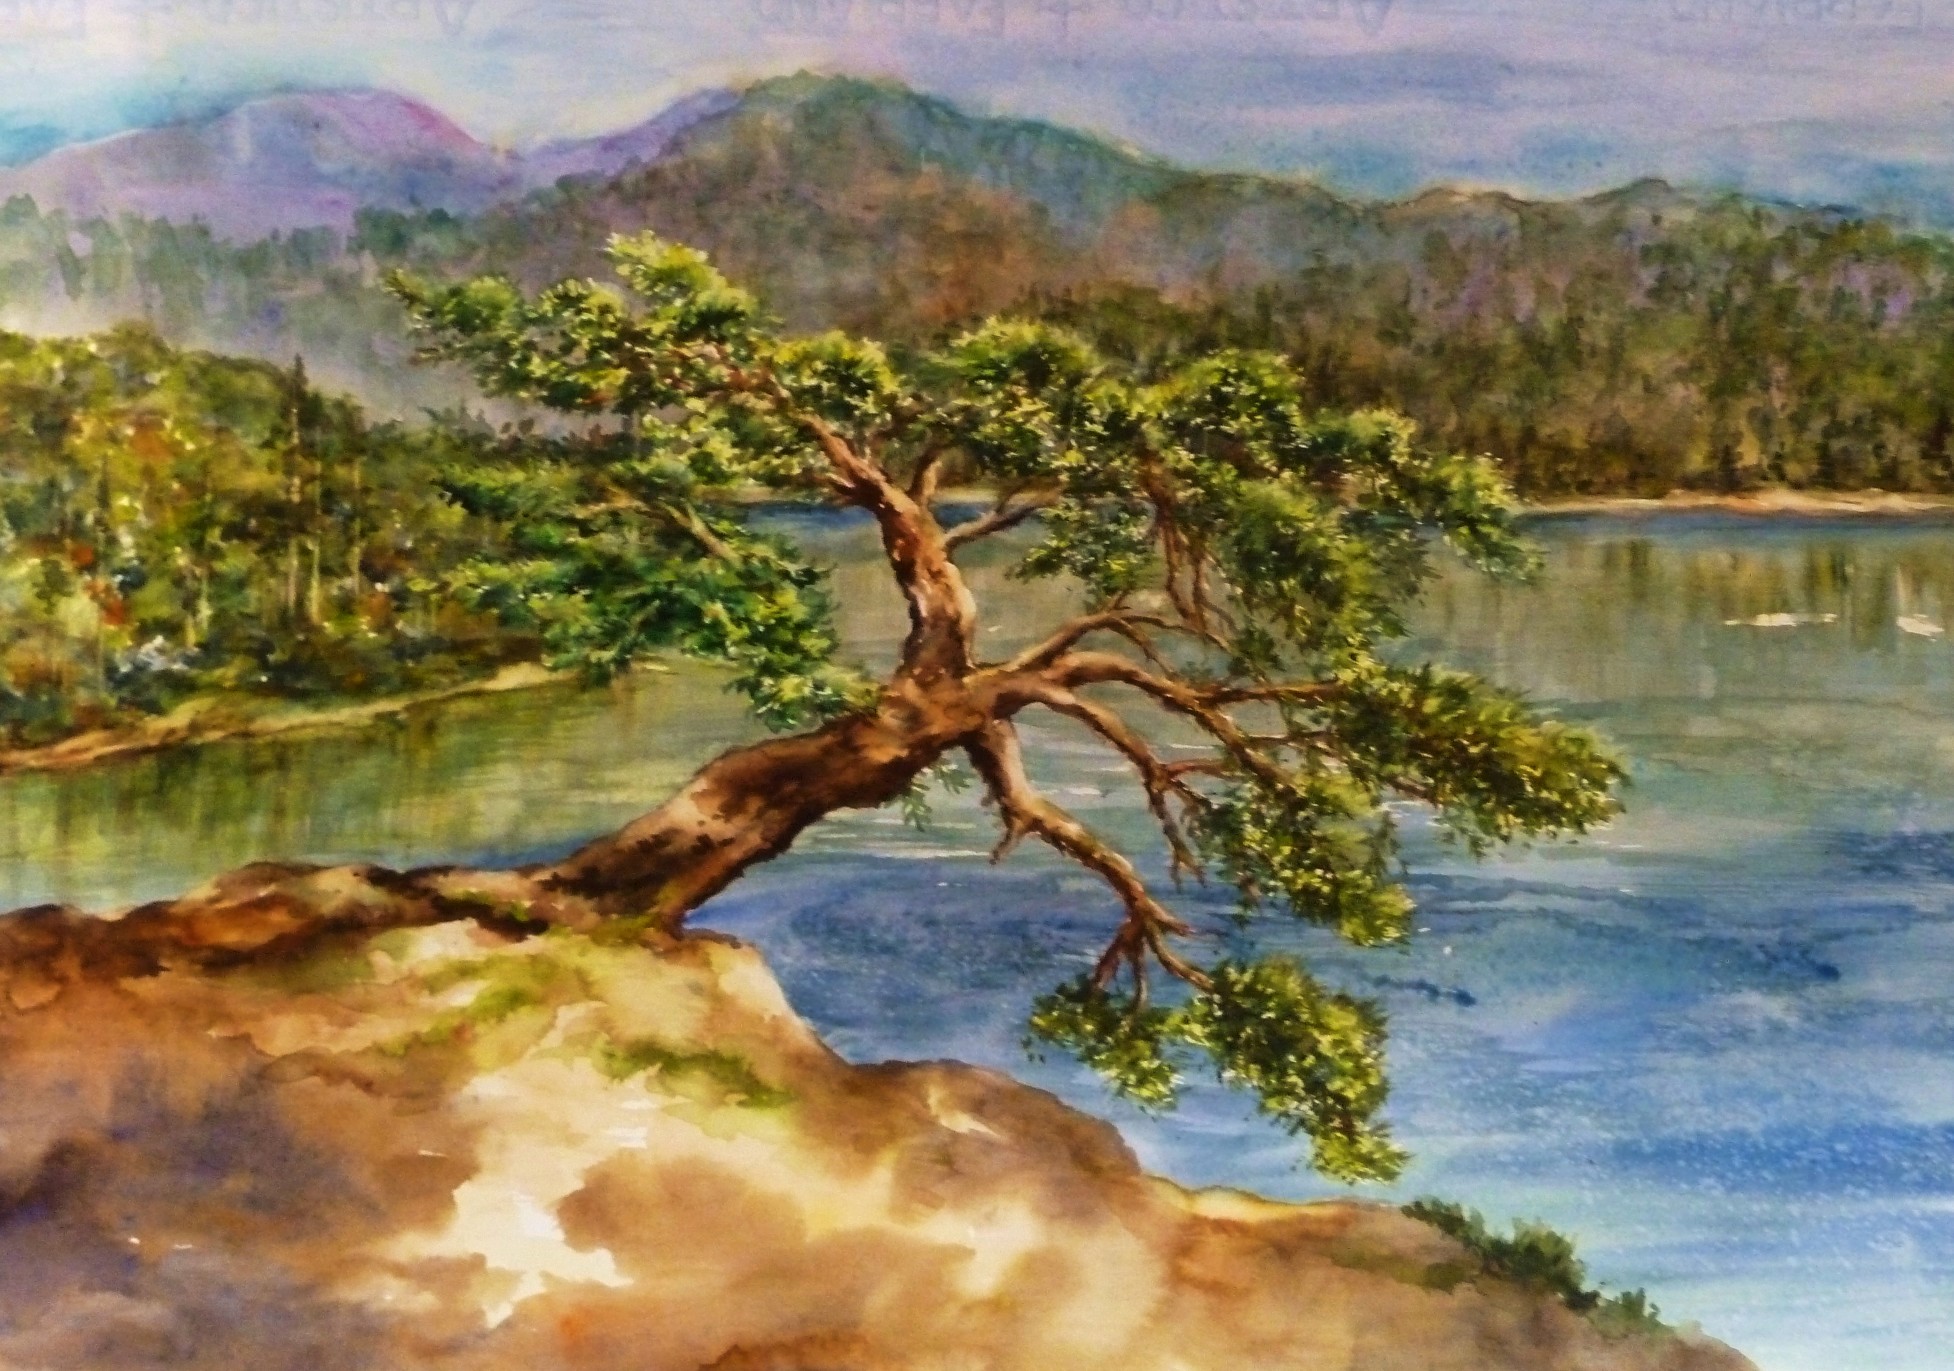 The Jumping Tree 14x22by Denise Cole.JPG